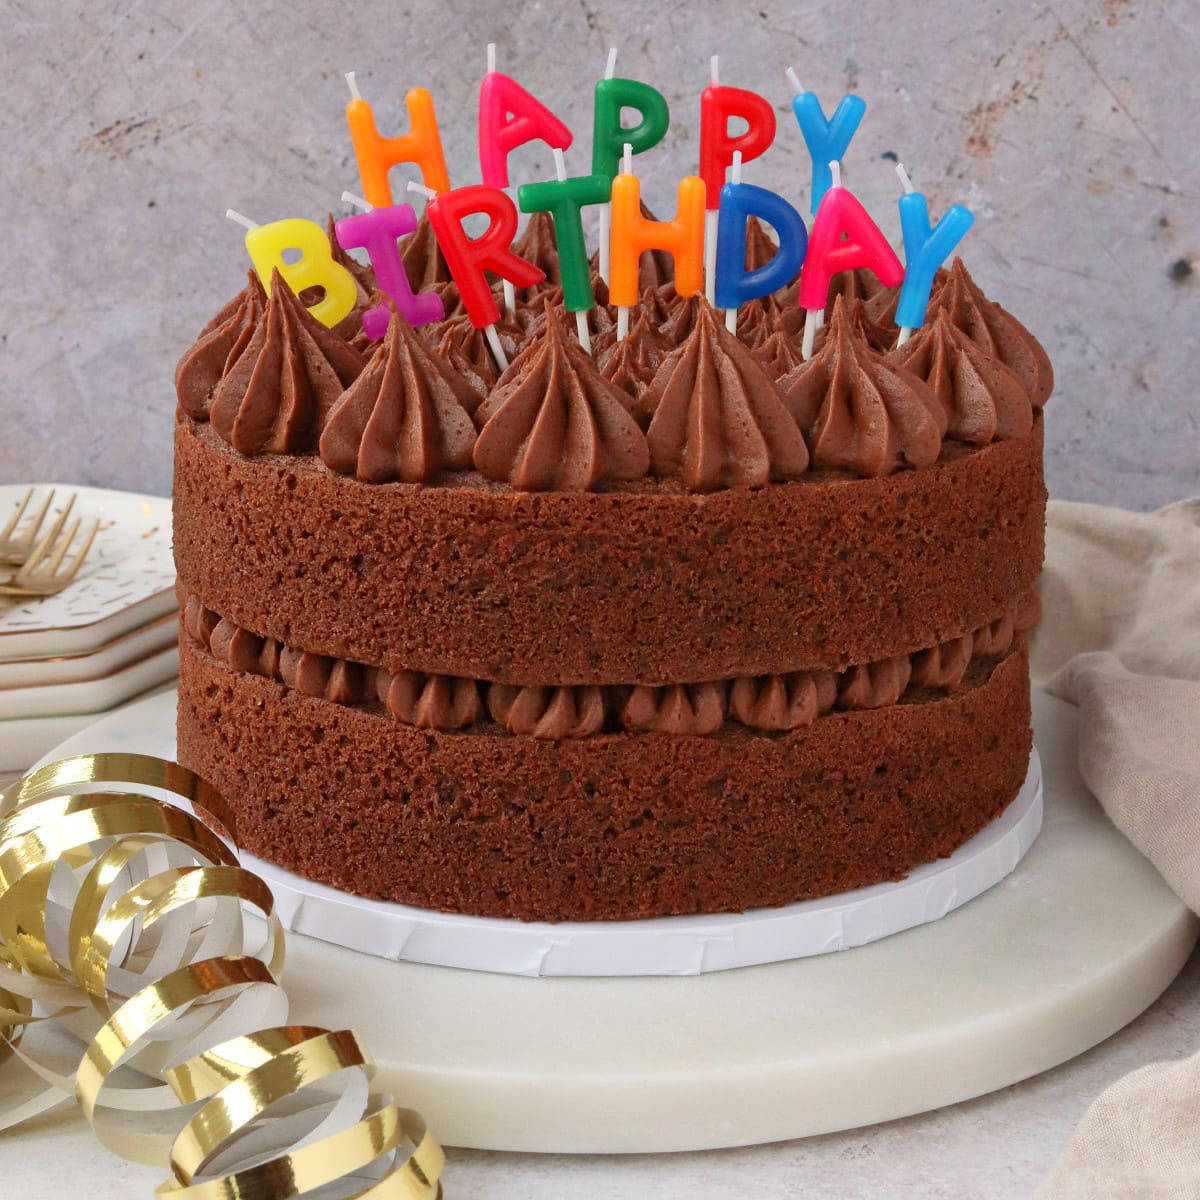 Birthday Chocolate Cake With Candles Wallpaper